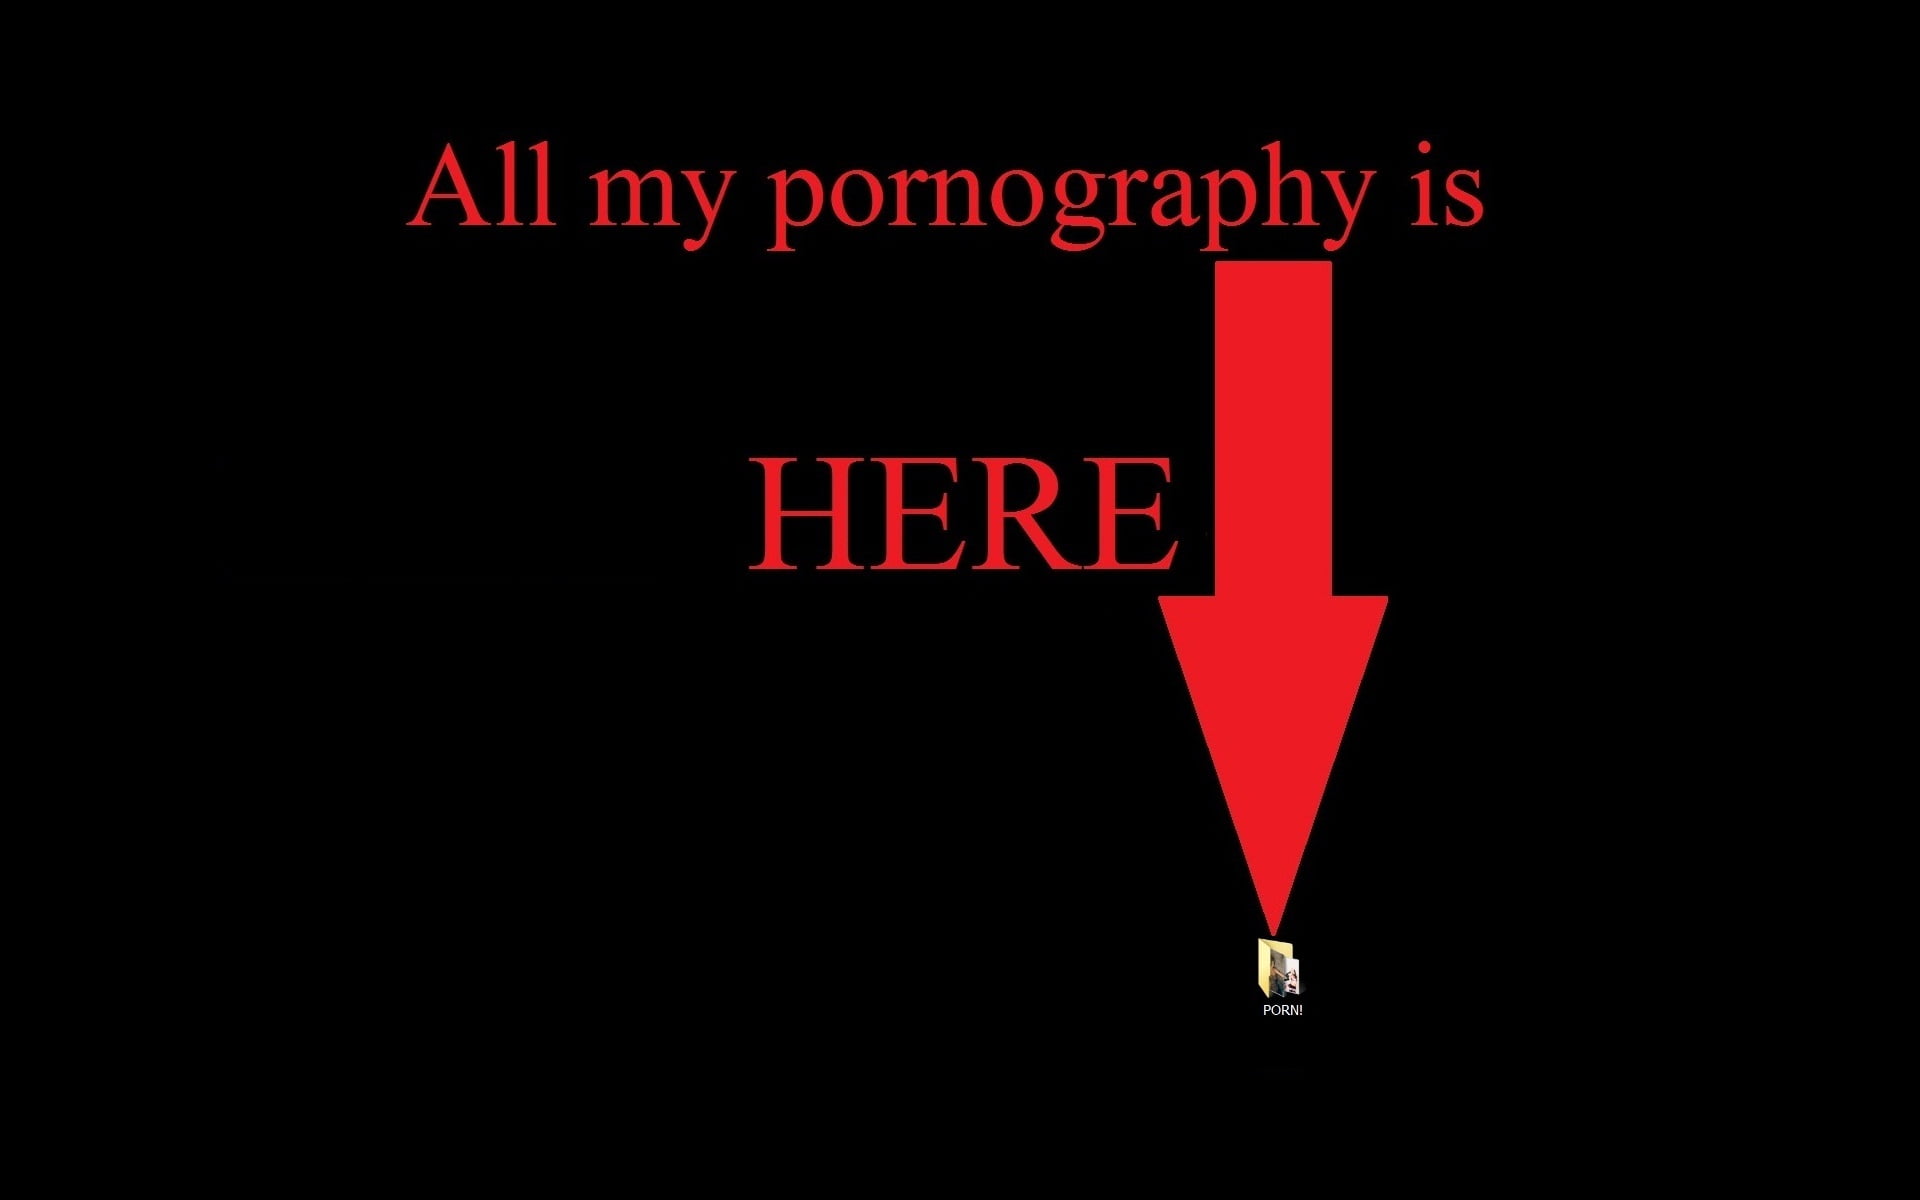 all my pornography is here text overlay, black background with red text